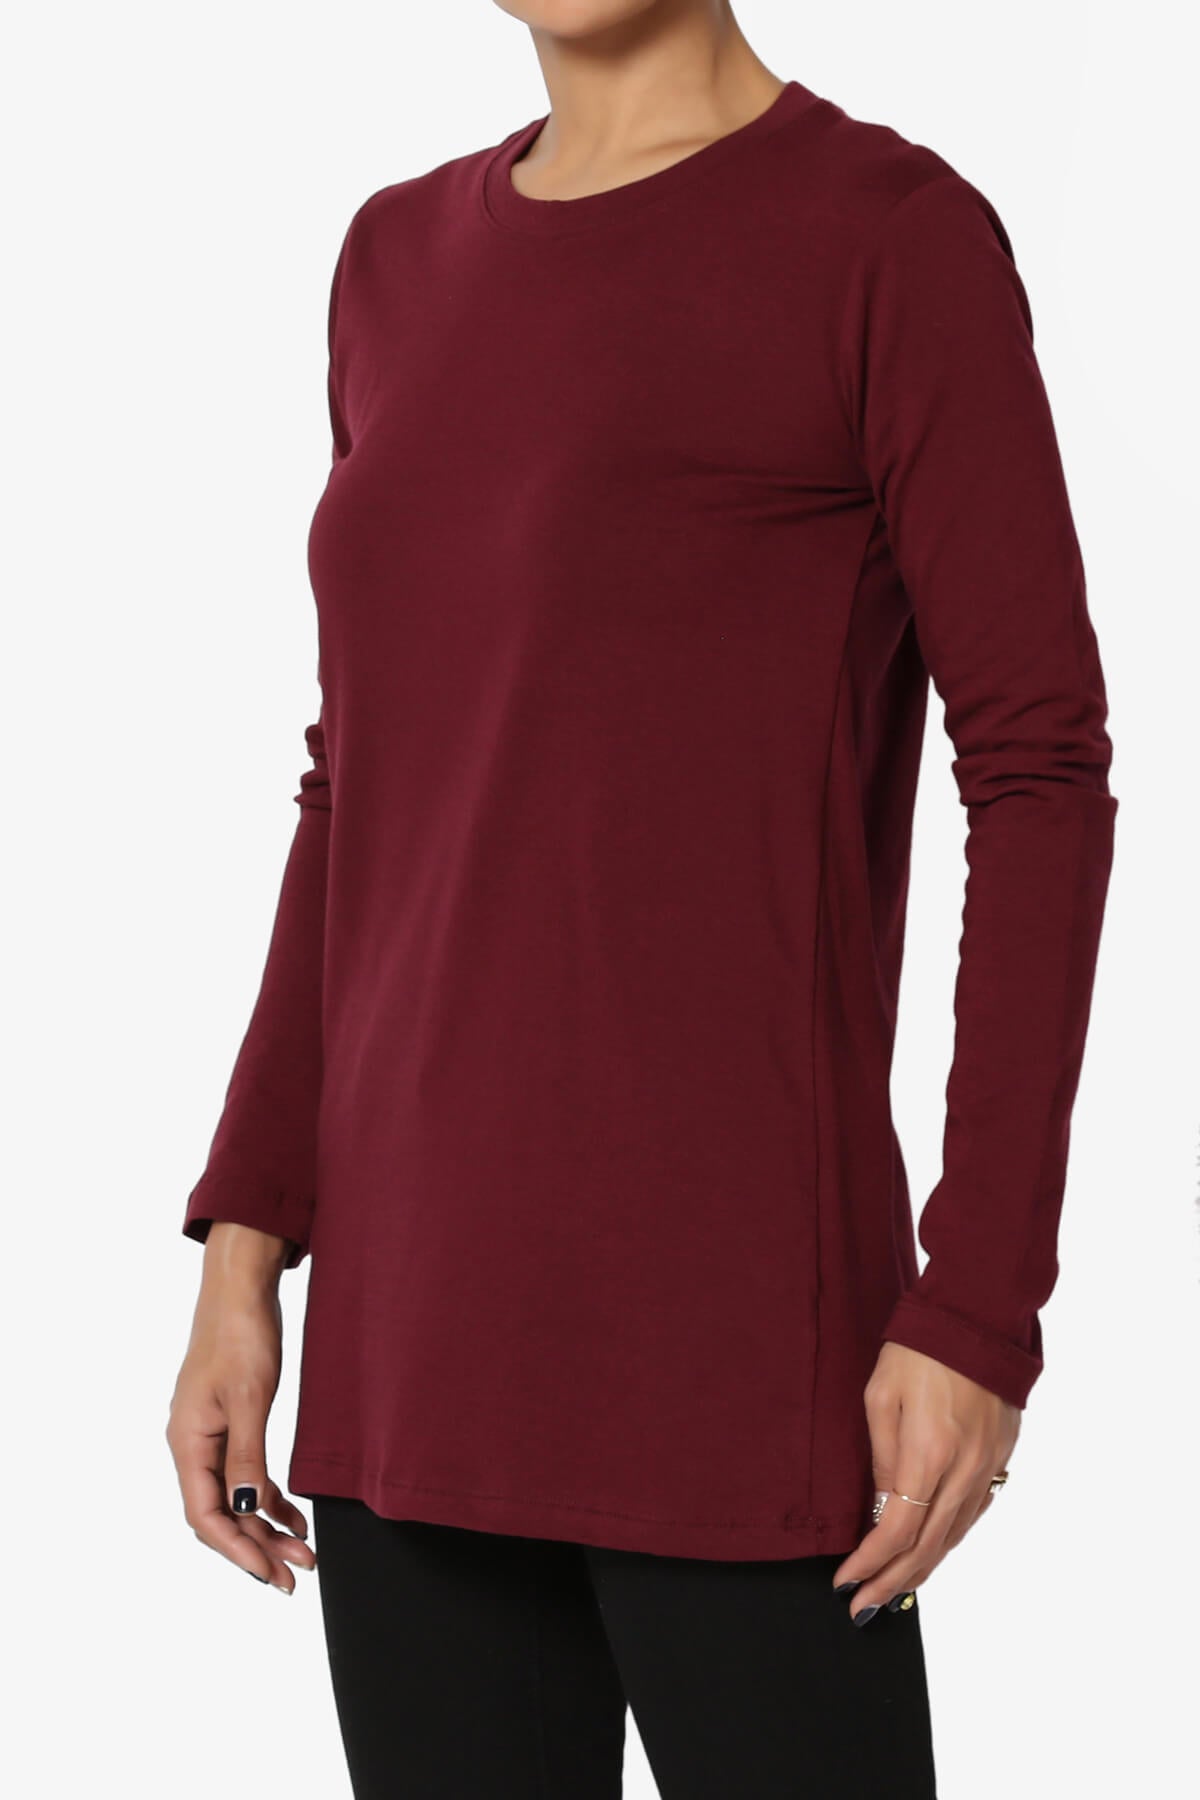 Load image into Gallery viewer, Lasso Cotton Crew Neck Long Sleeve T-Shirt DARK BURGUNDY_3
